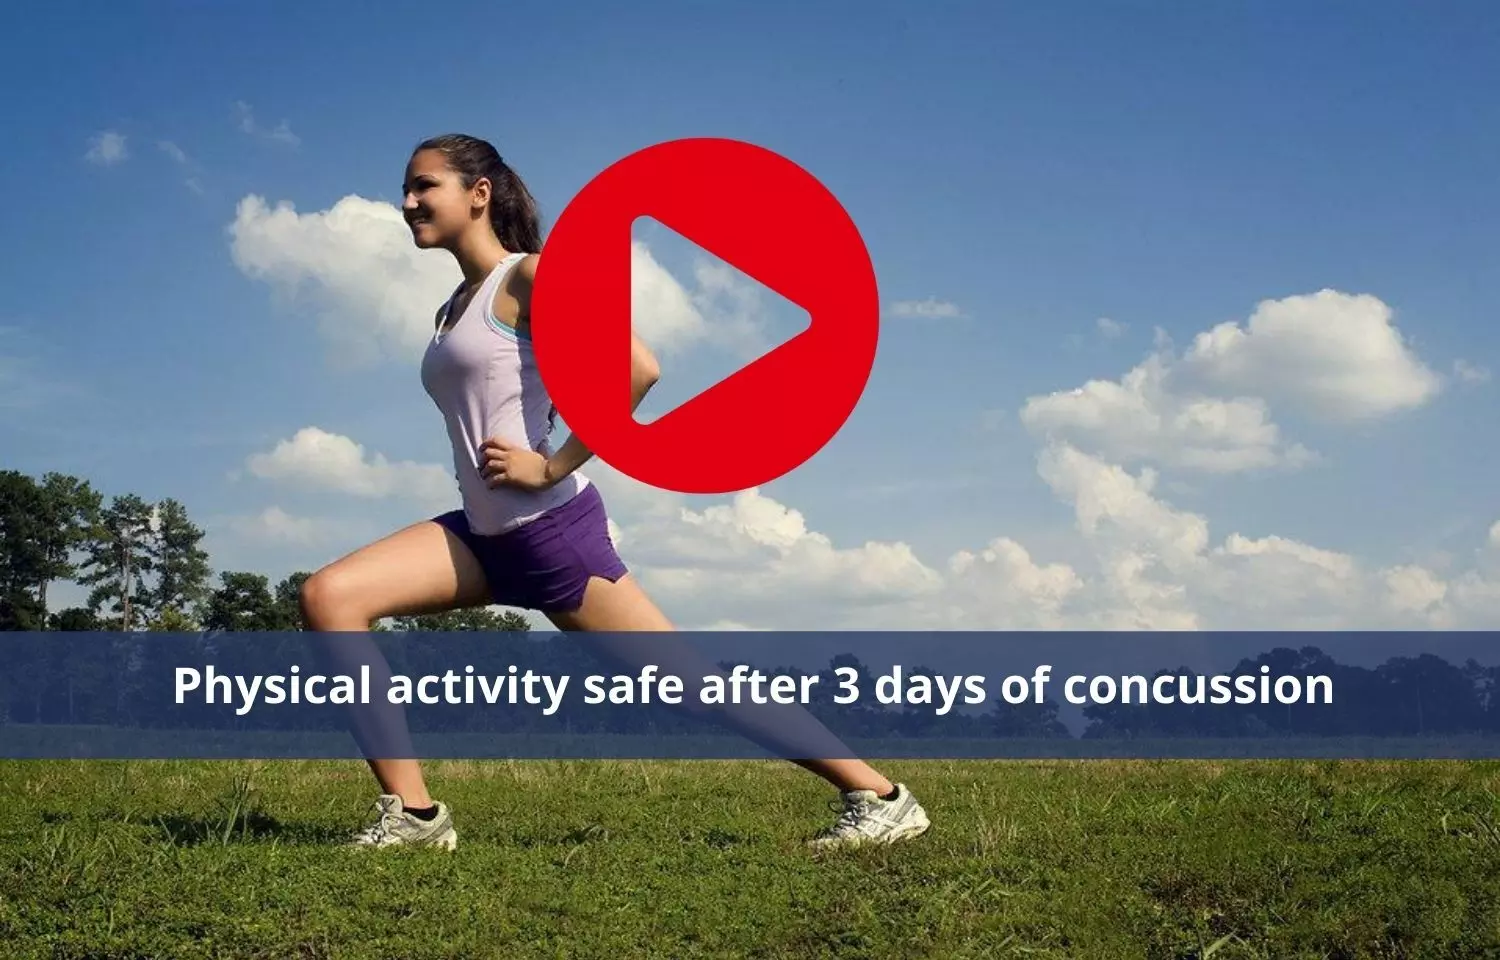 Physical exercise safe initially after 3 days of concussion